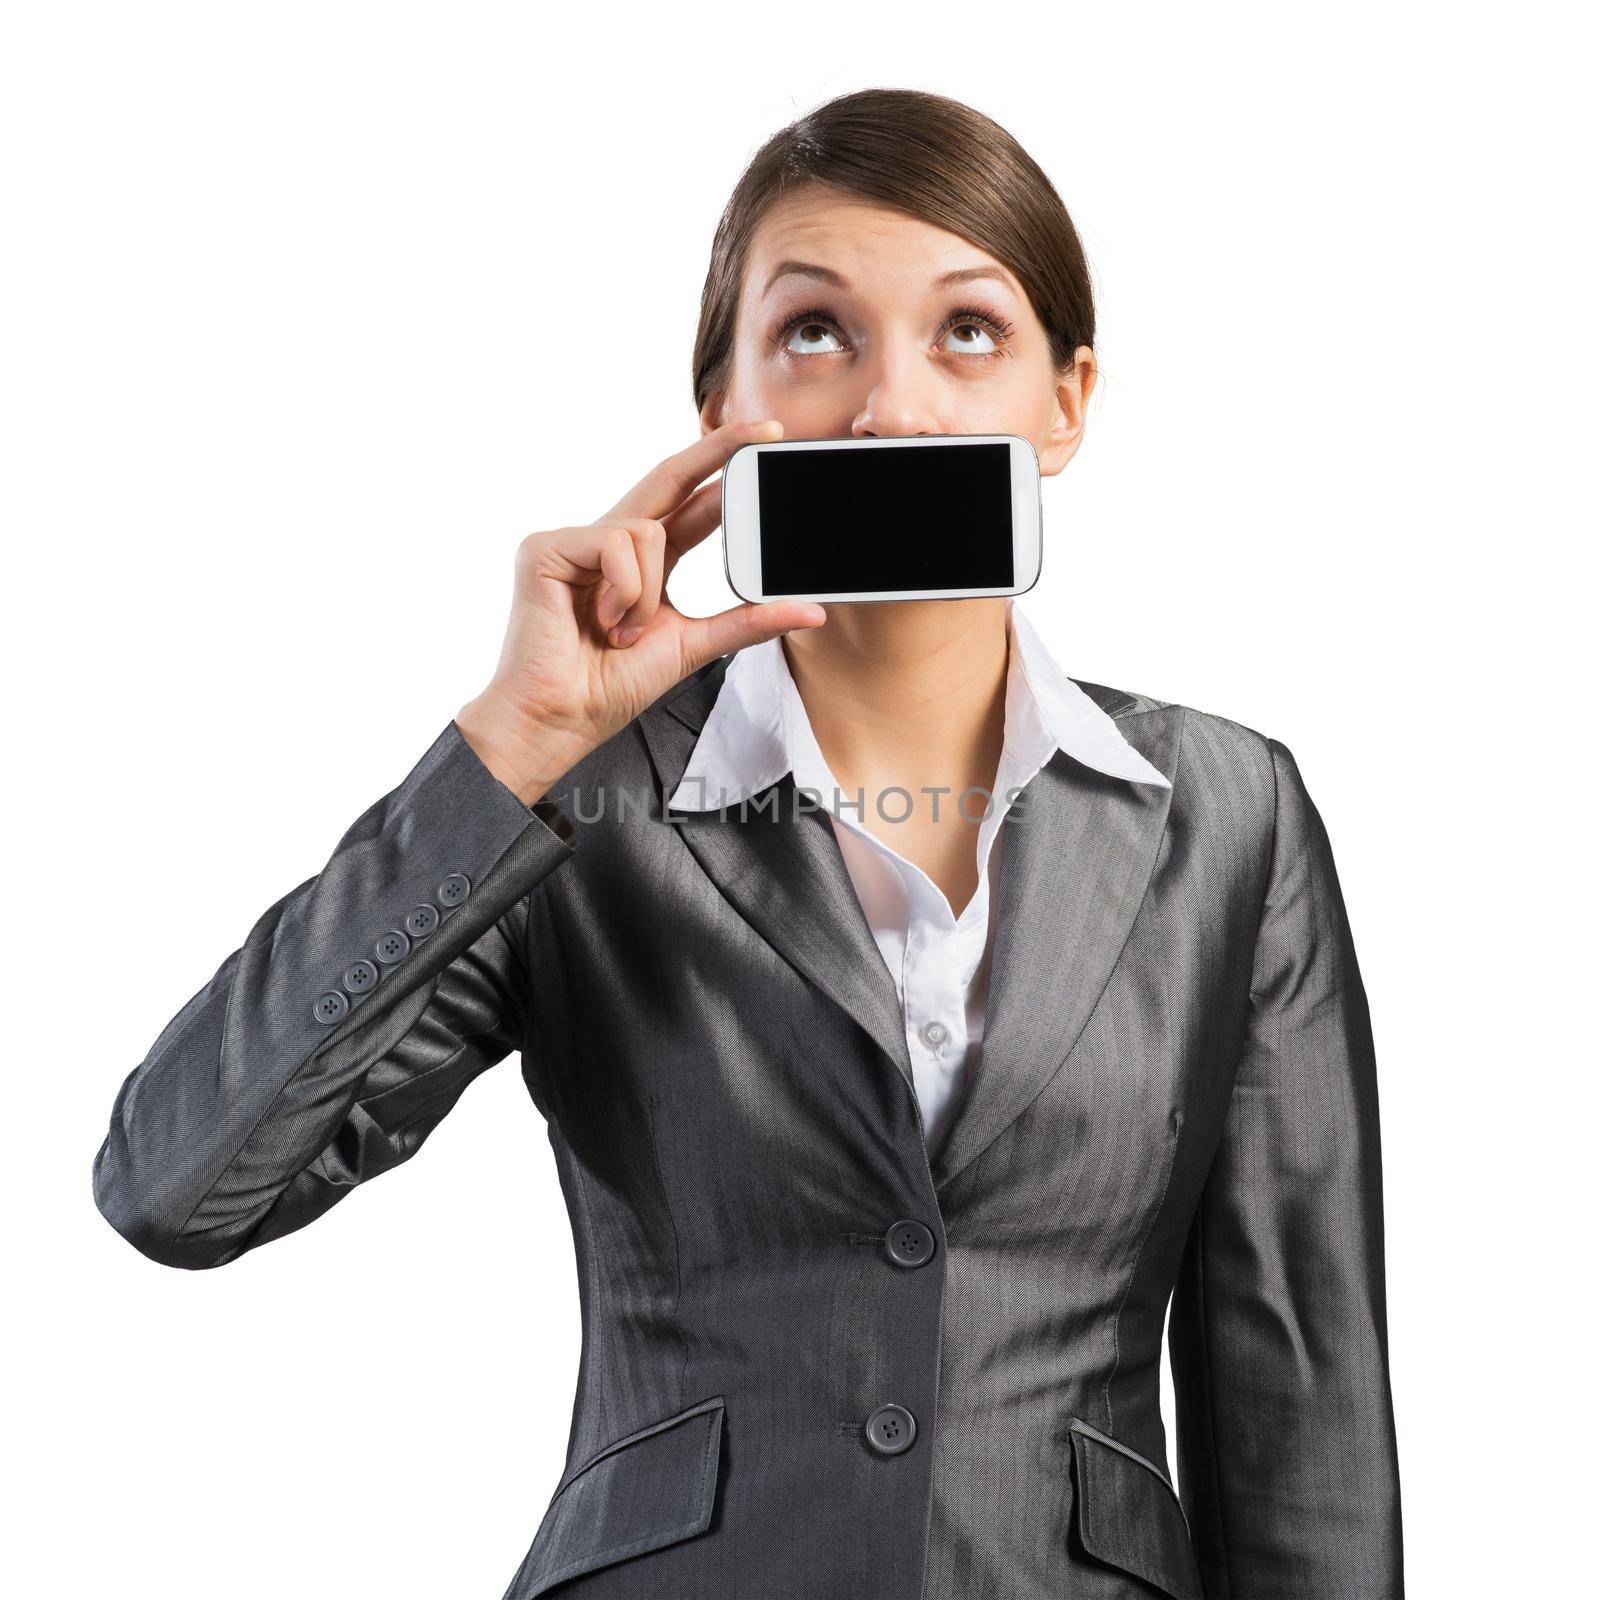 Portrait of young woman covering her mouth with smartphone. Businesswoman showing mobile phone with blank screen. Corporate businessperson isolated on white background. Mobile communication layout